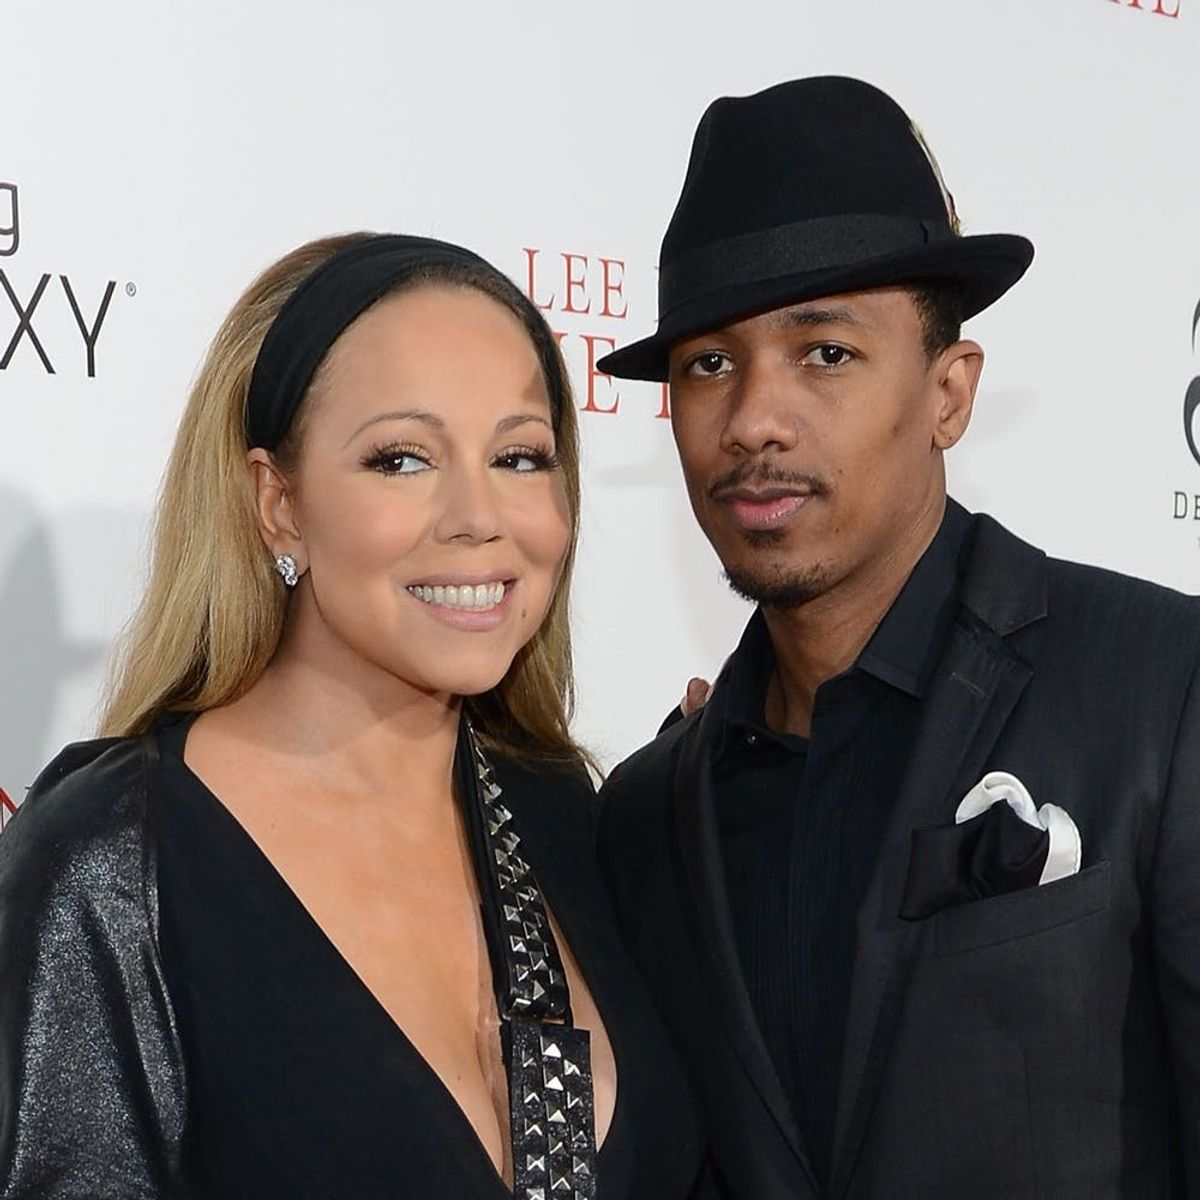 Is Mariah Carey and Nick Cannon’s Relationship Back On?